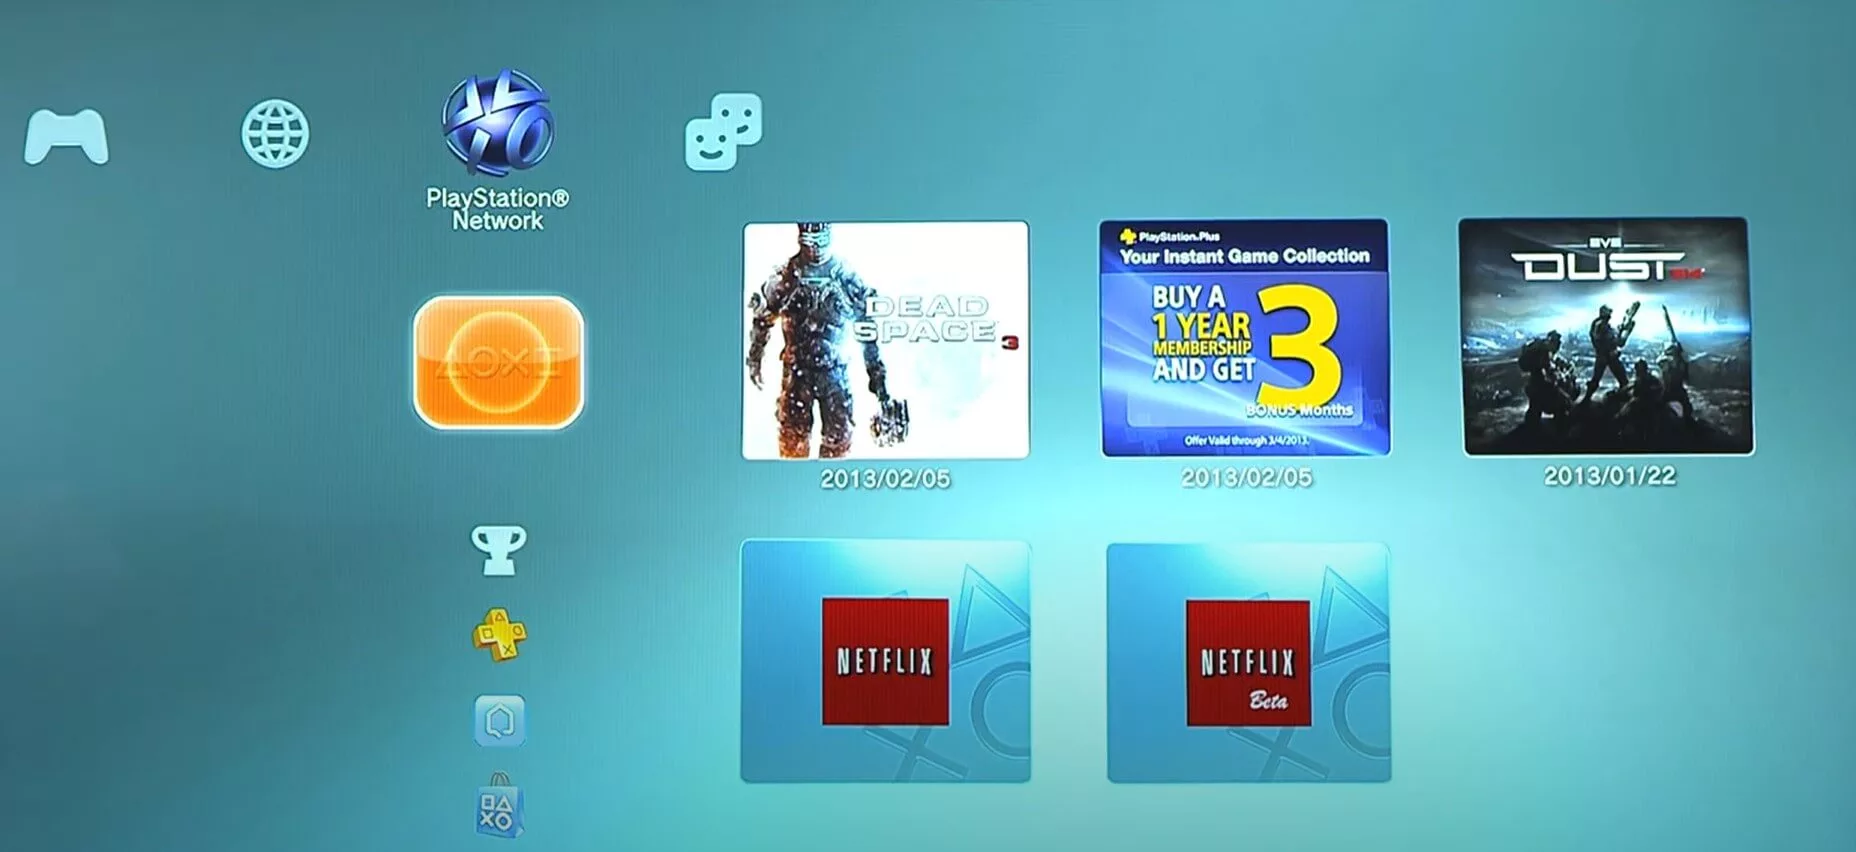 Steps to Activate Netflix on PlayStation 3